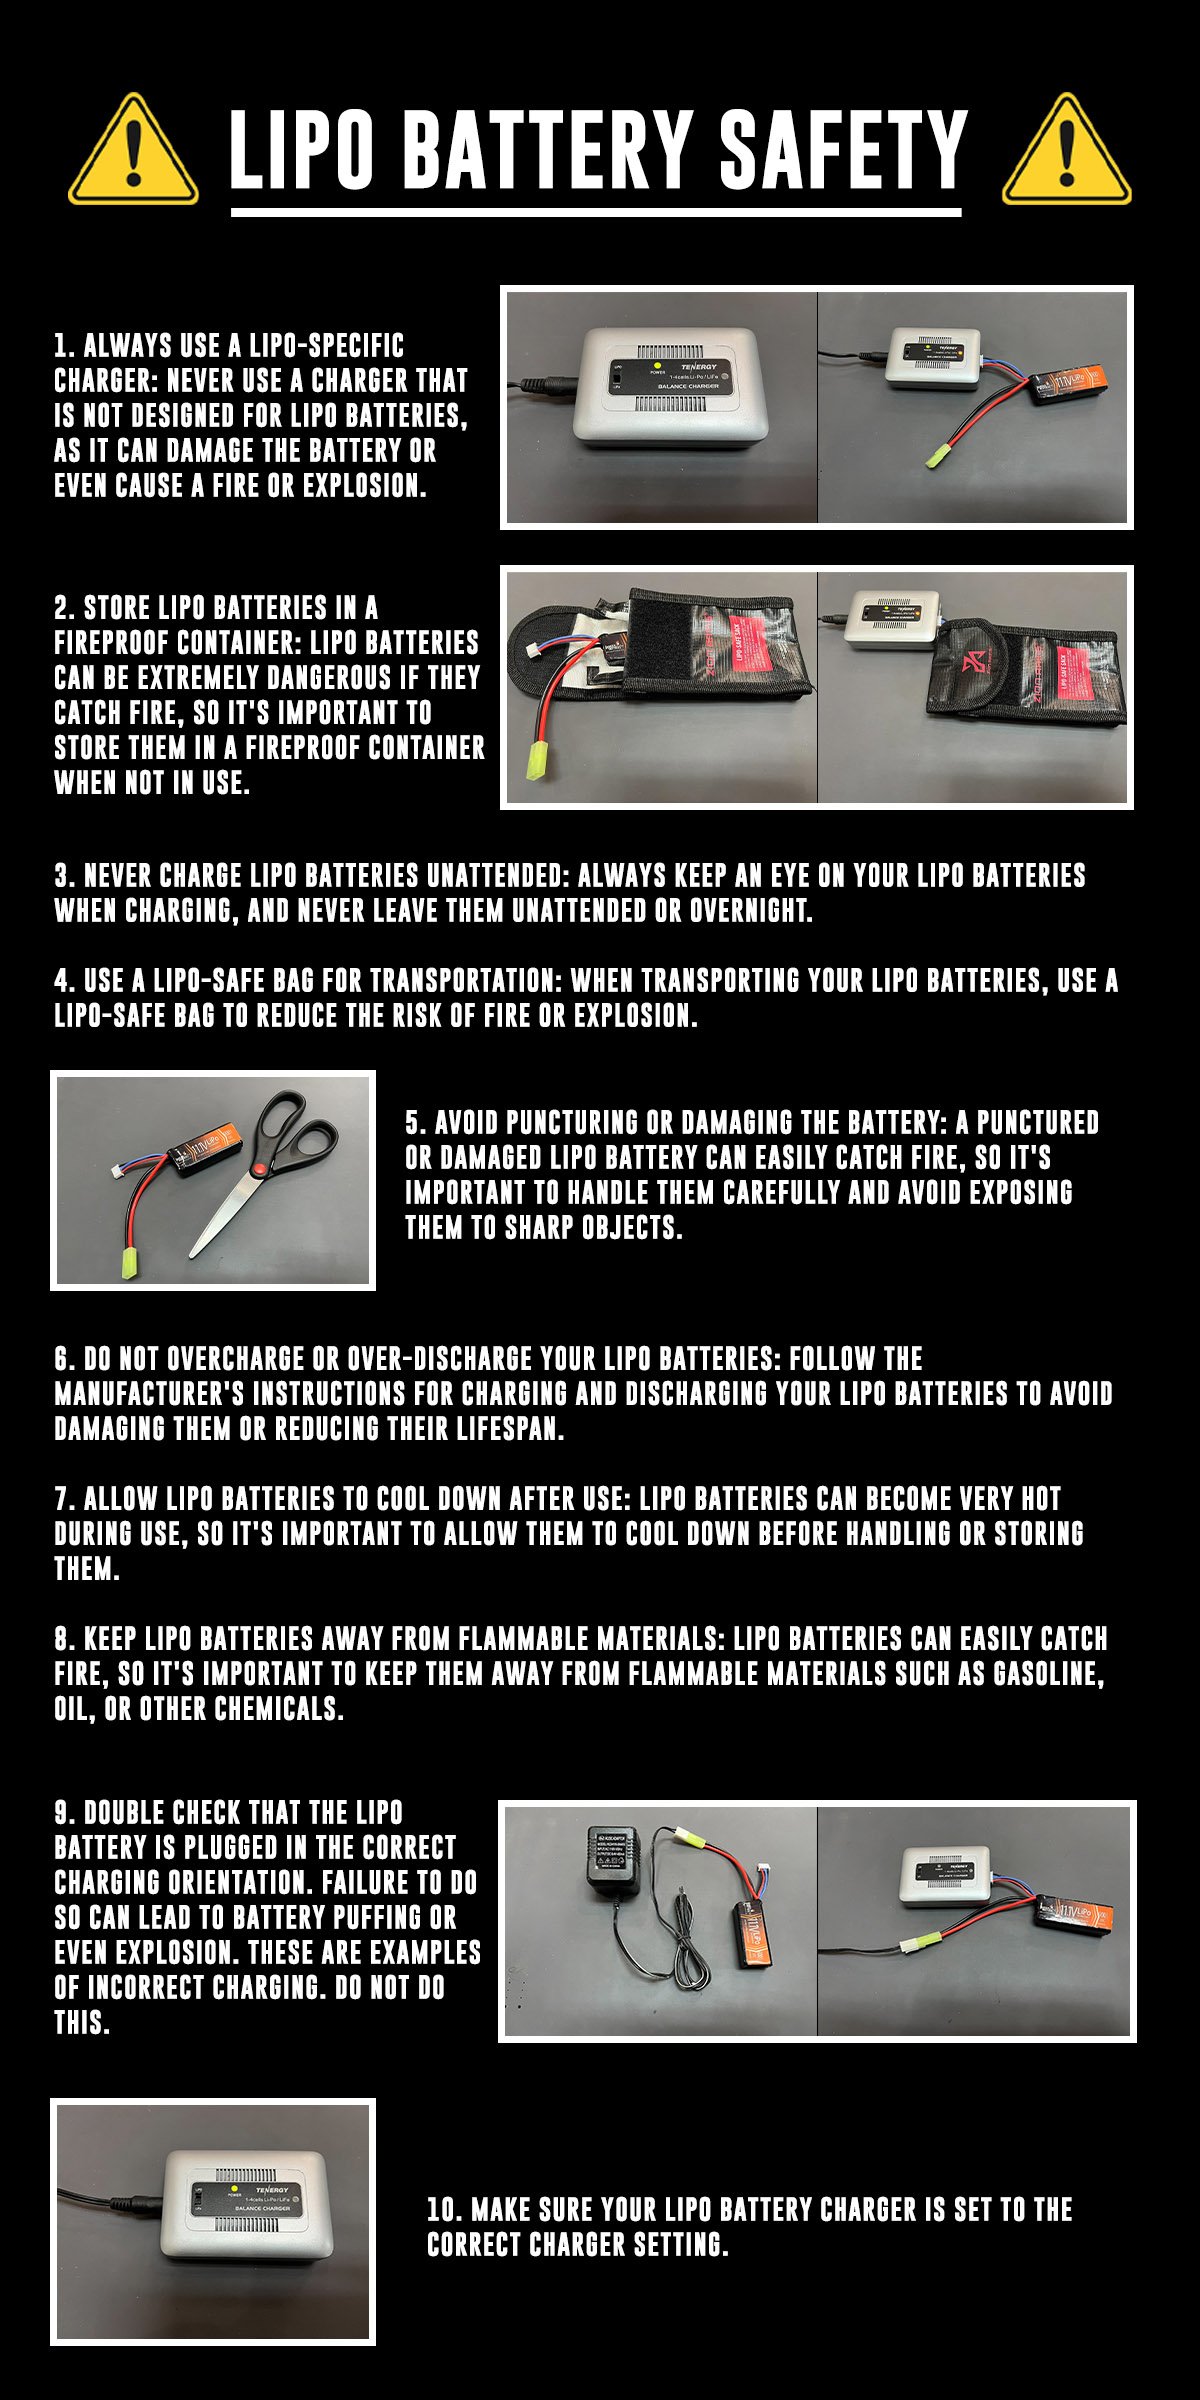 LIPO Battery Safety information image